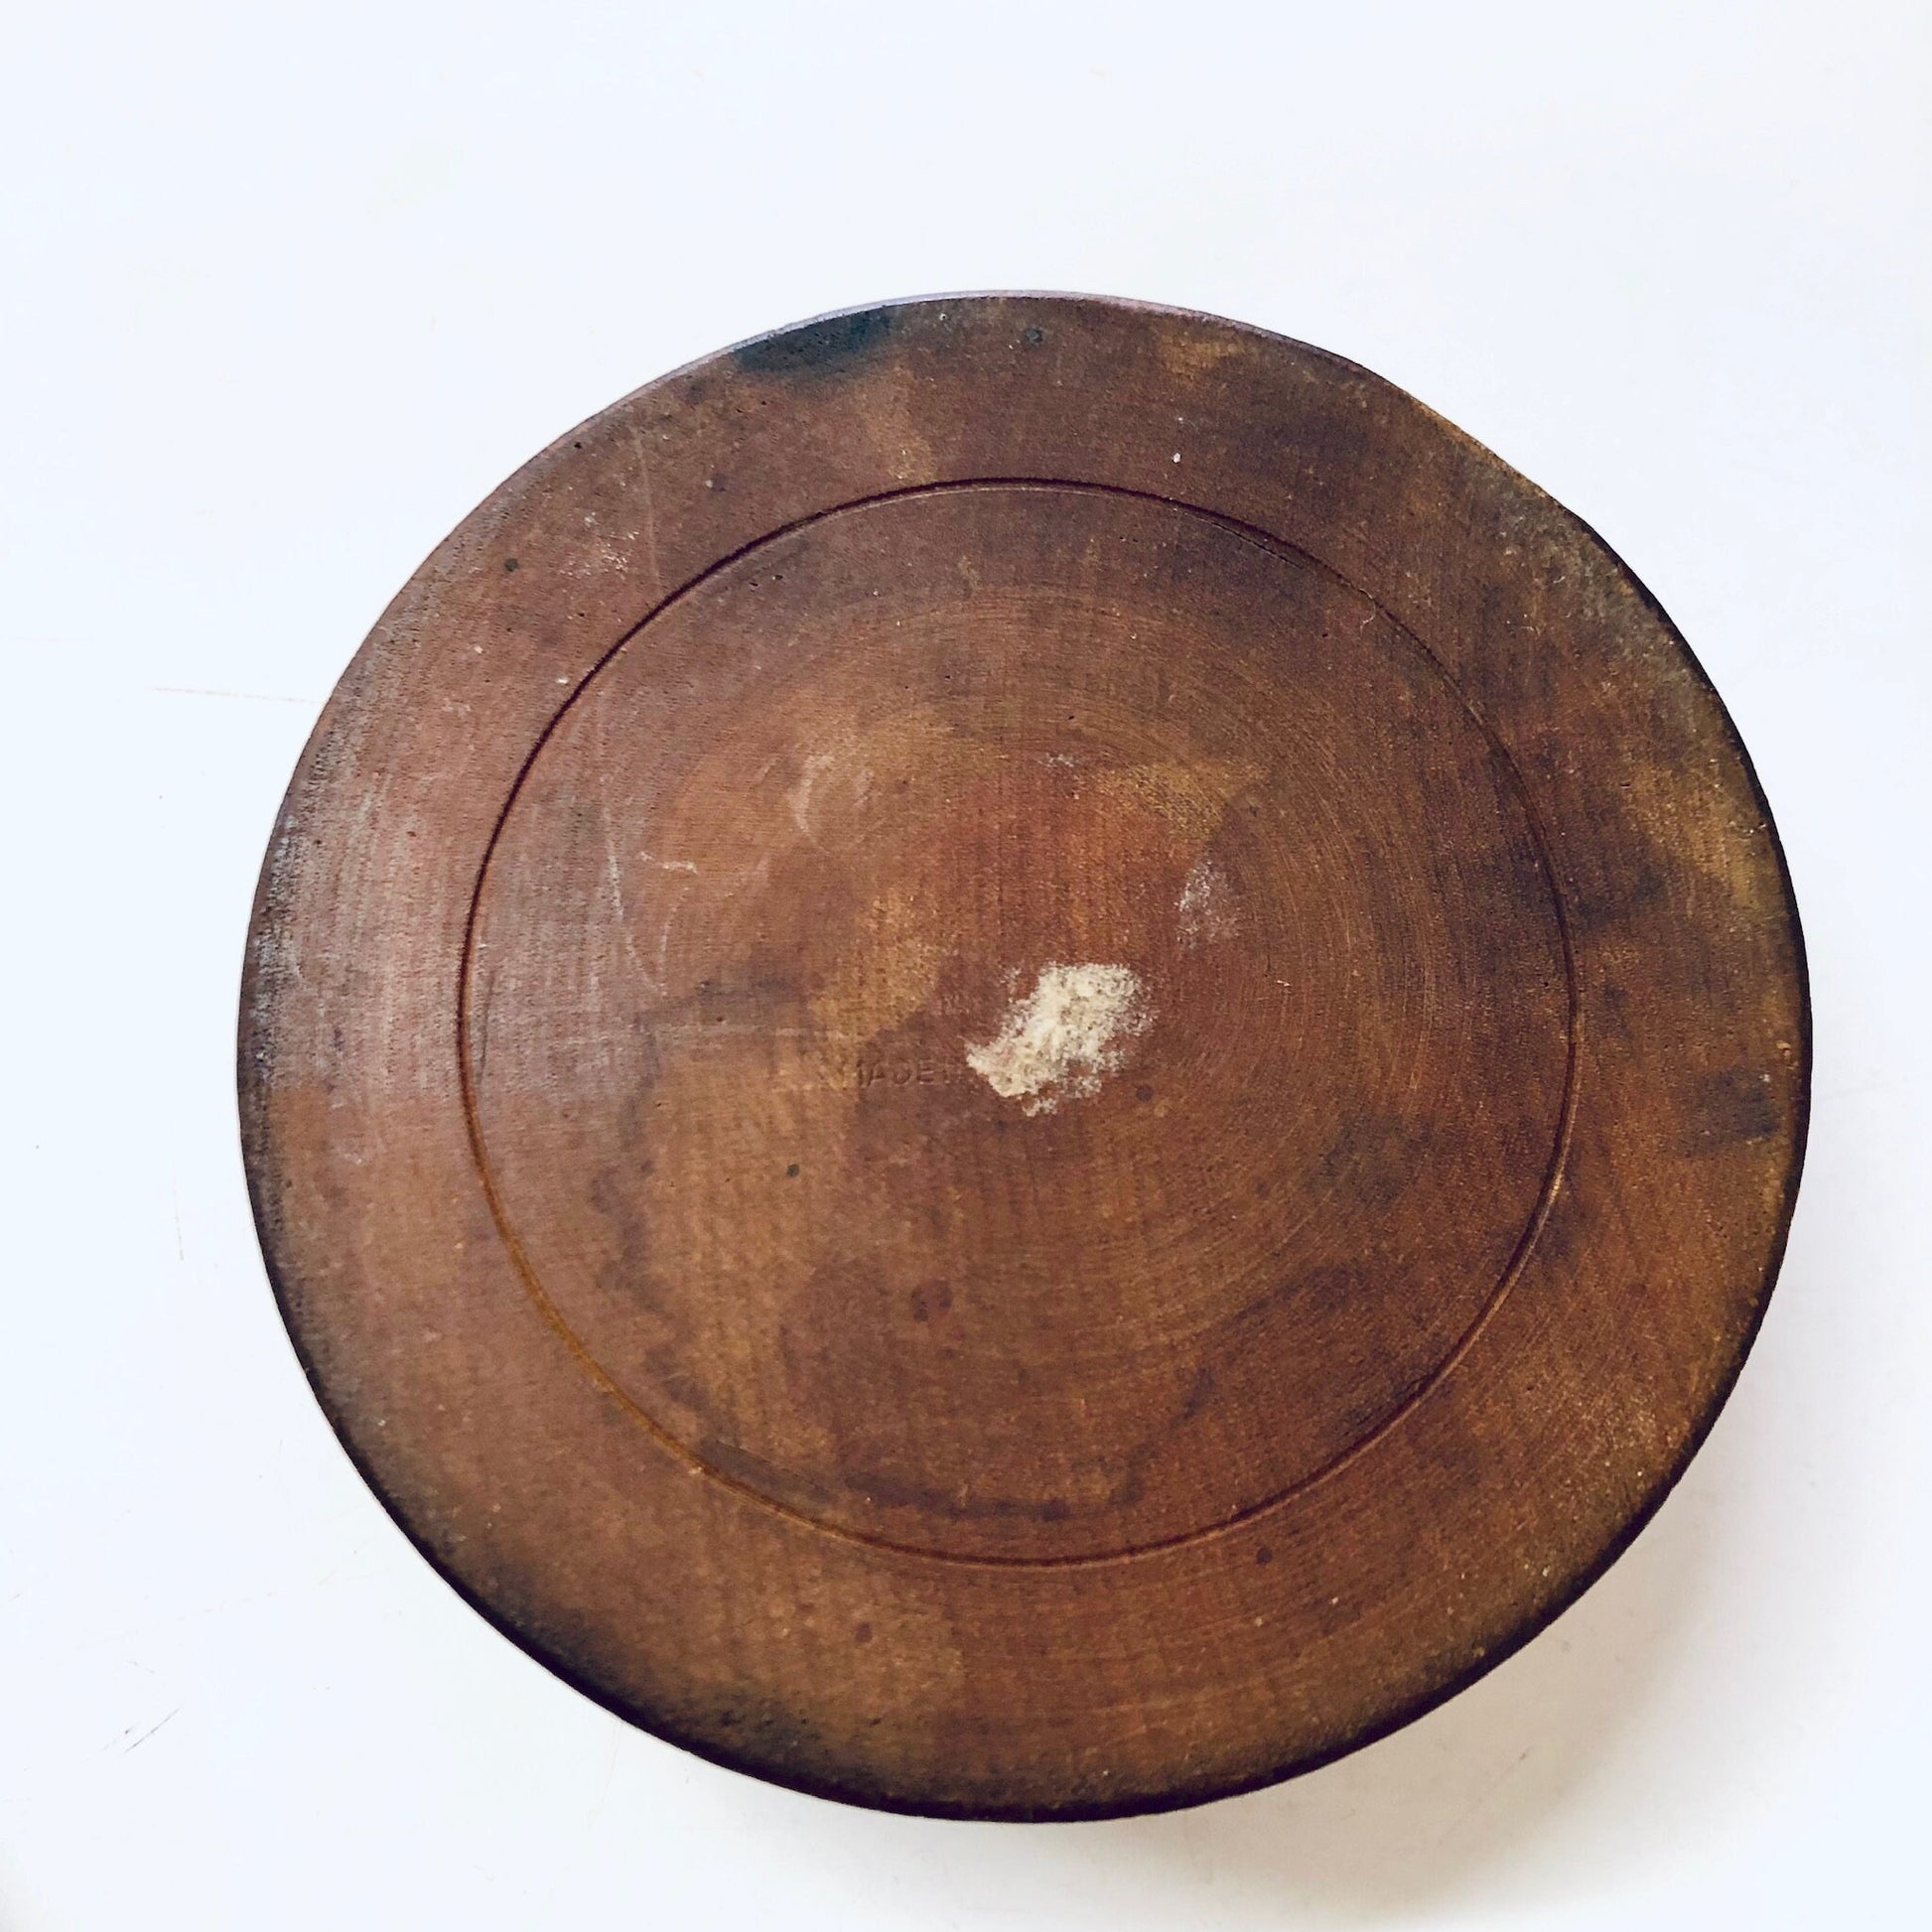 Vintage round wooden carved jewelry box with rustic patina, perfect for storing trinkets or as unique home decor